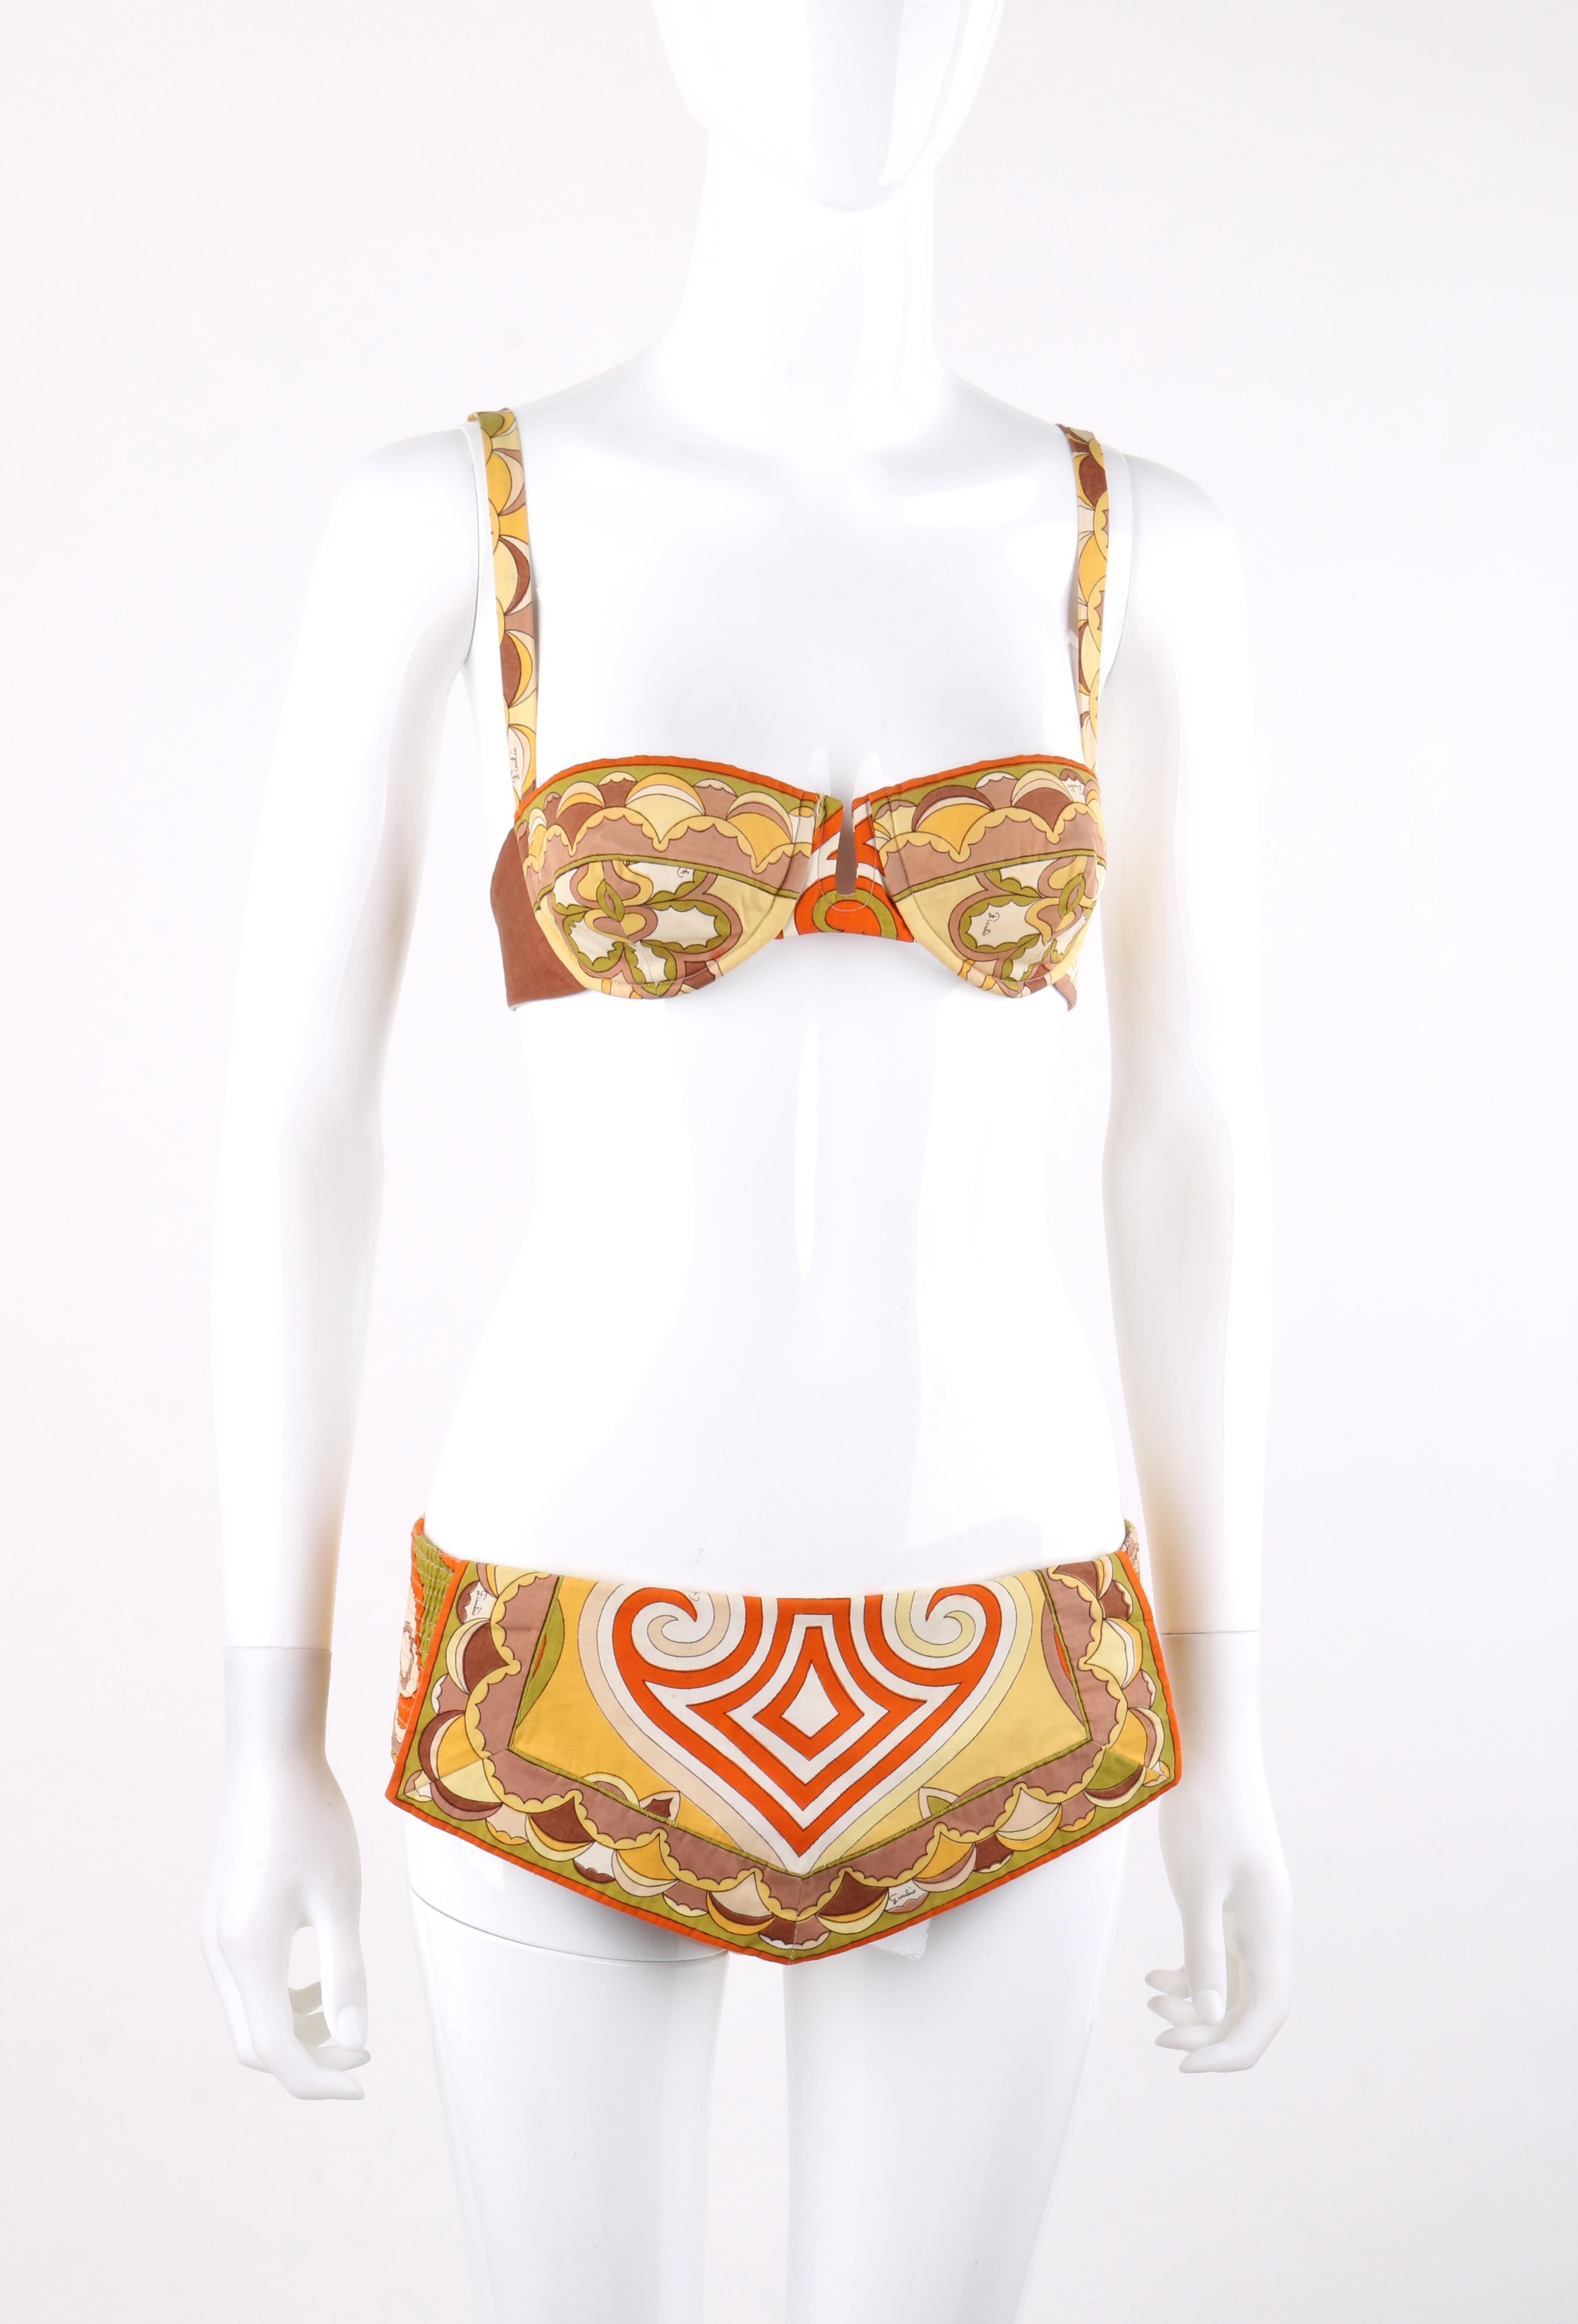 EMILIO PUCCI c.1960’s Multi-color Signature Print Two Piece Bikini Swimsuit
 
Circa: 1960’s
Label(s): Emilio Pucci / Made in Italy - Exclusively for Sak’s Fifth Ave. 
Style: Bikini
Color(s): Shades of brown, orange, yellow, green, off-white and